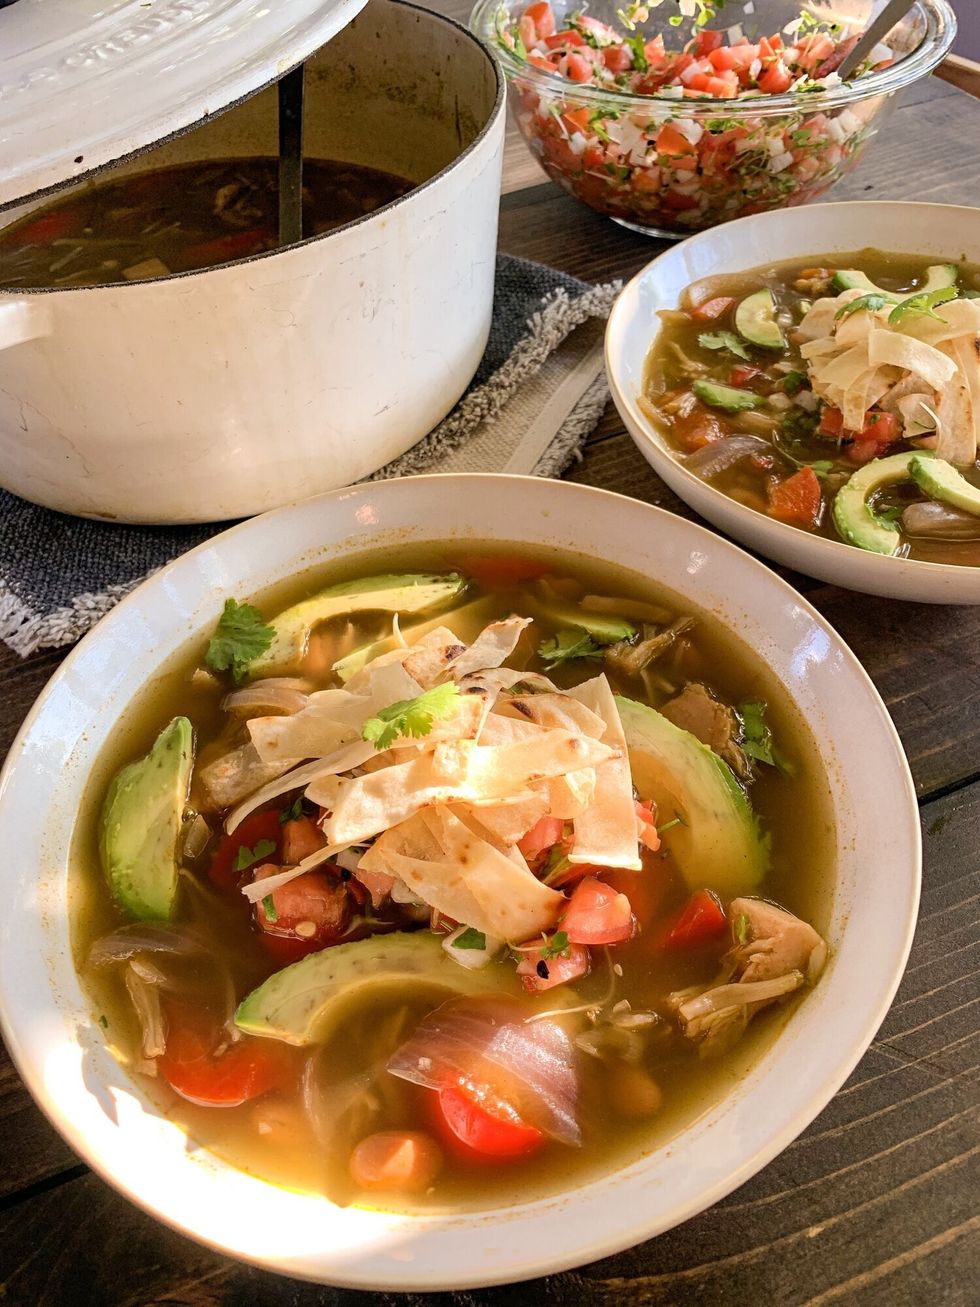 Two Bowls Of Soup Are On A Wooden Surface ?id=48586141&width=980